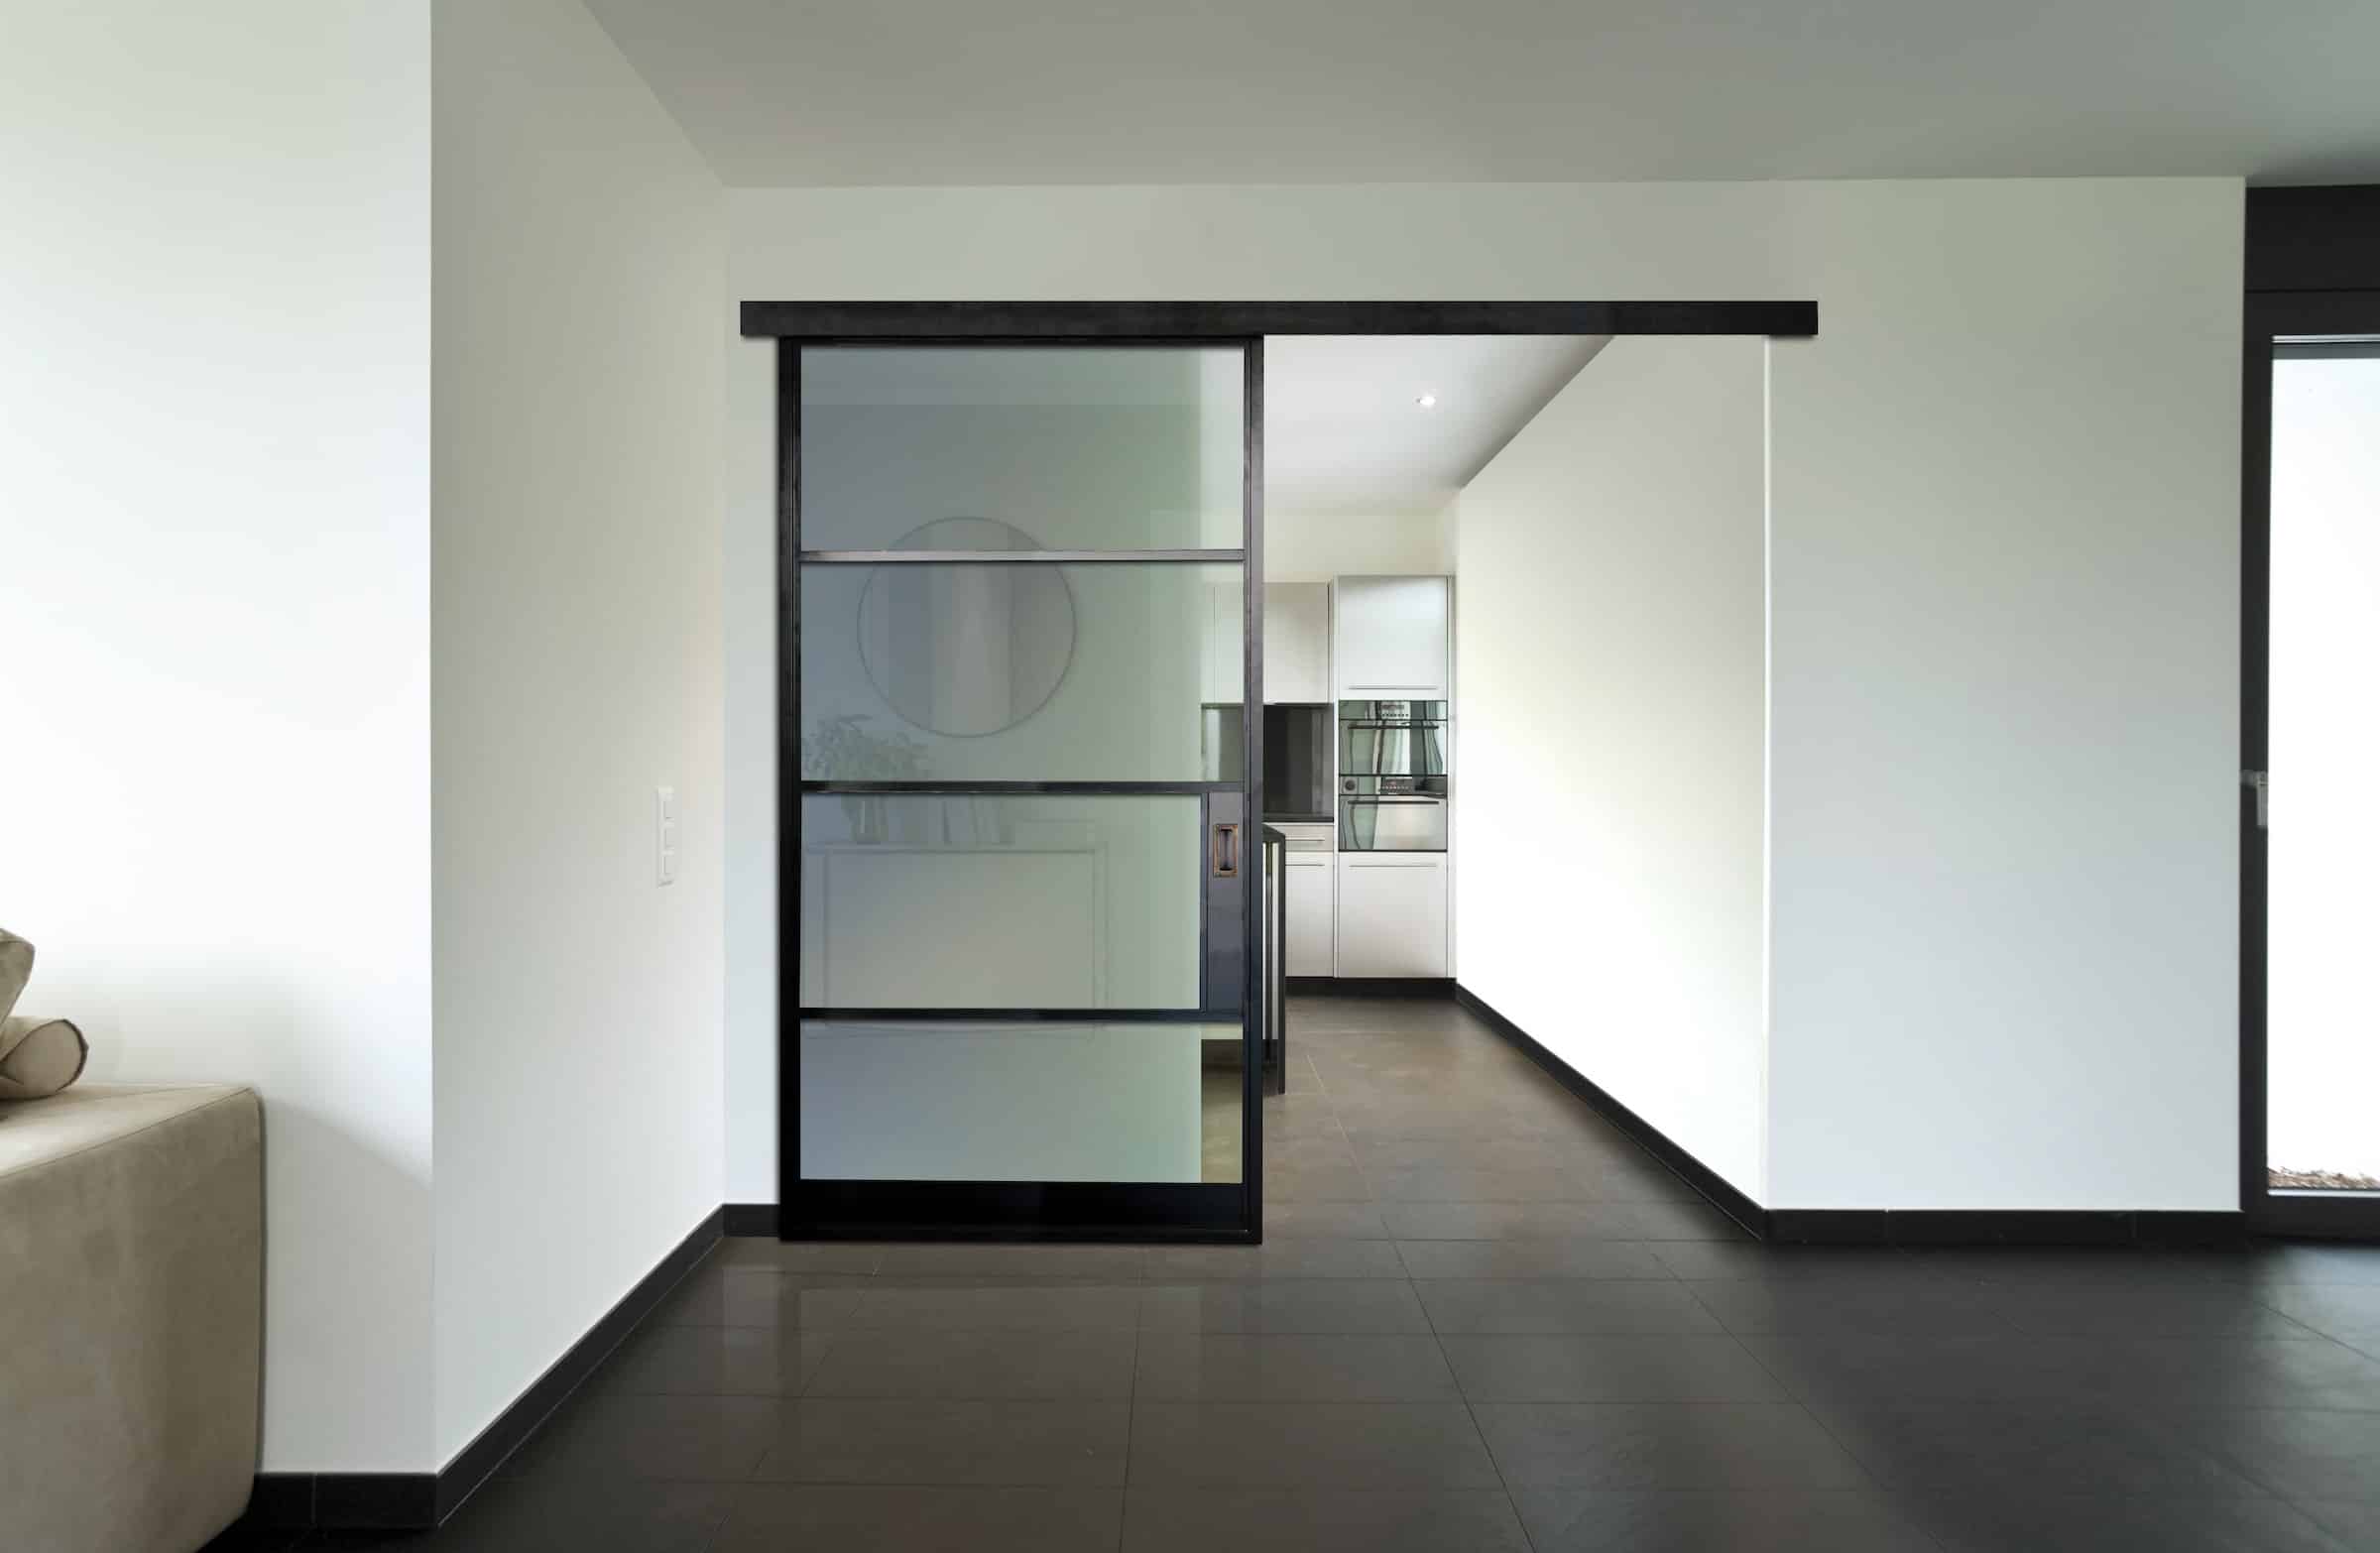 aluco interior sliding doors in a kitchen lounge partition